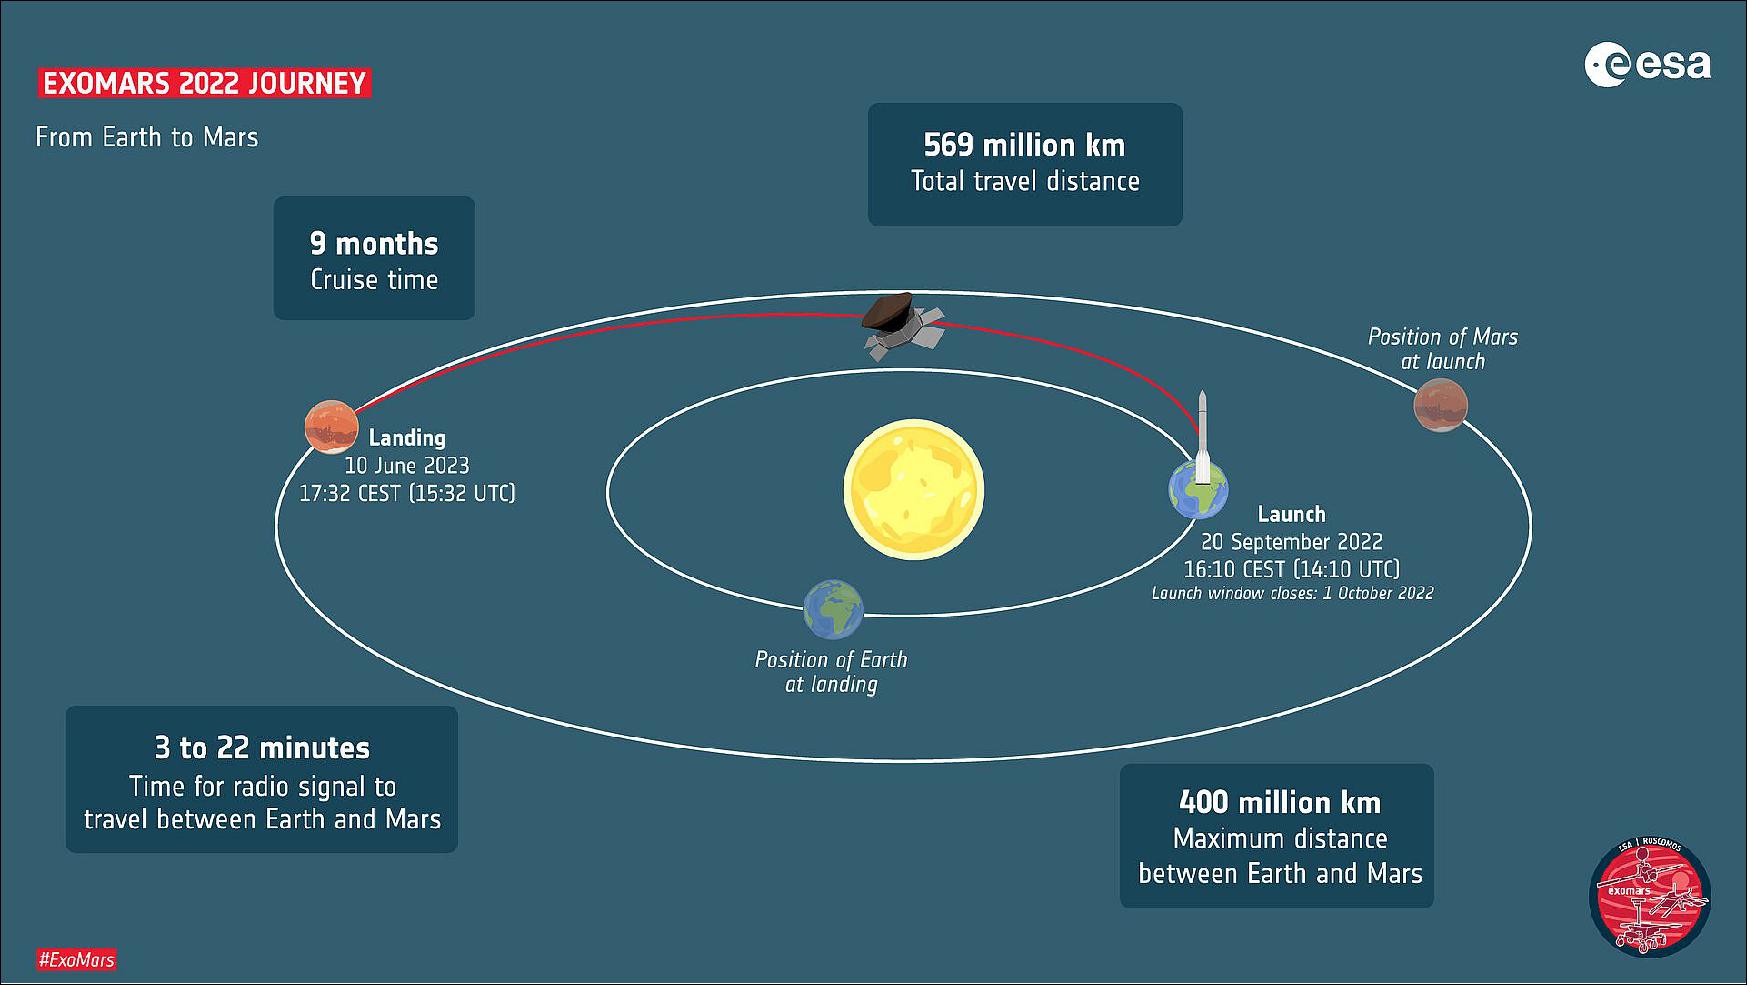 Figure 10: The path that ExoMars 2022 will follow to reach the Red Planet is set. The trajectory that will take the spacecraft from Earth to Mars in 264 days foresees a touchdown on the martian surface on 10 June 2023, at around 17:30 CEST (15:30 UTC), image credit: ESA